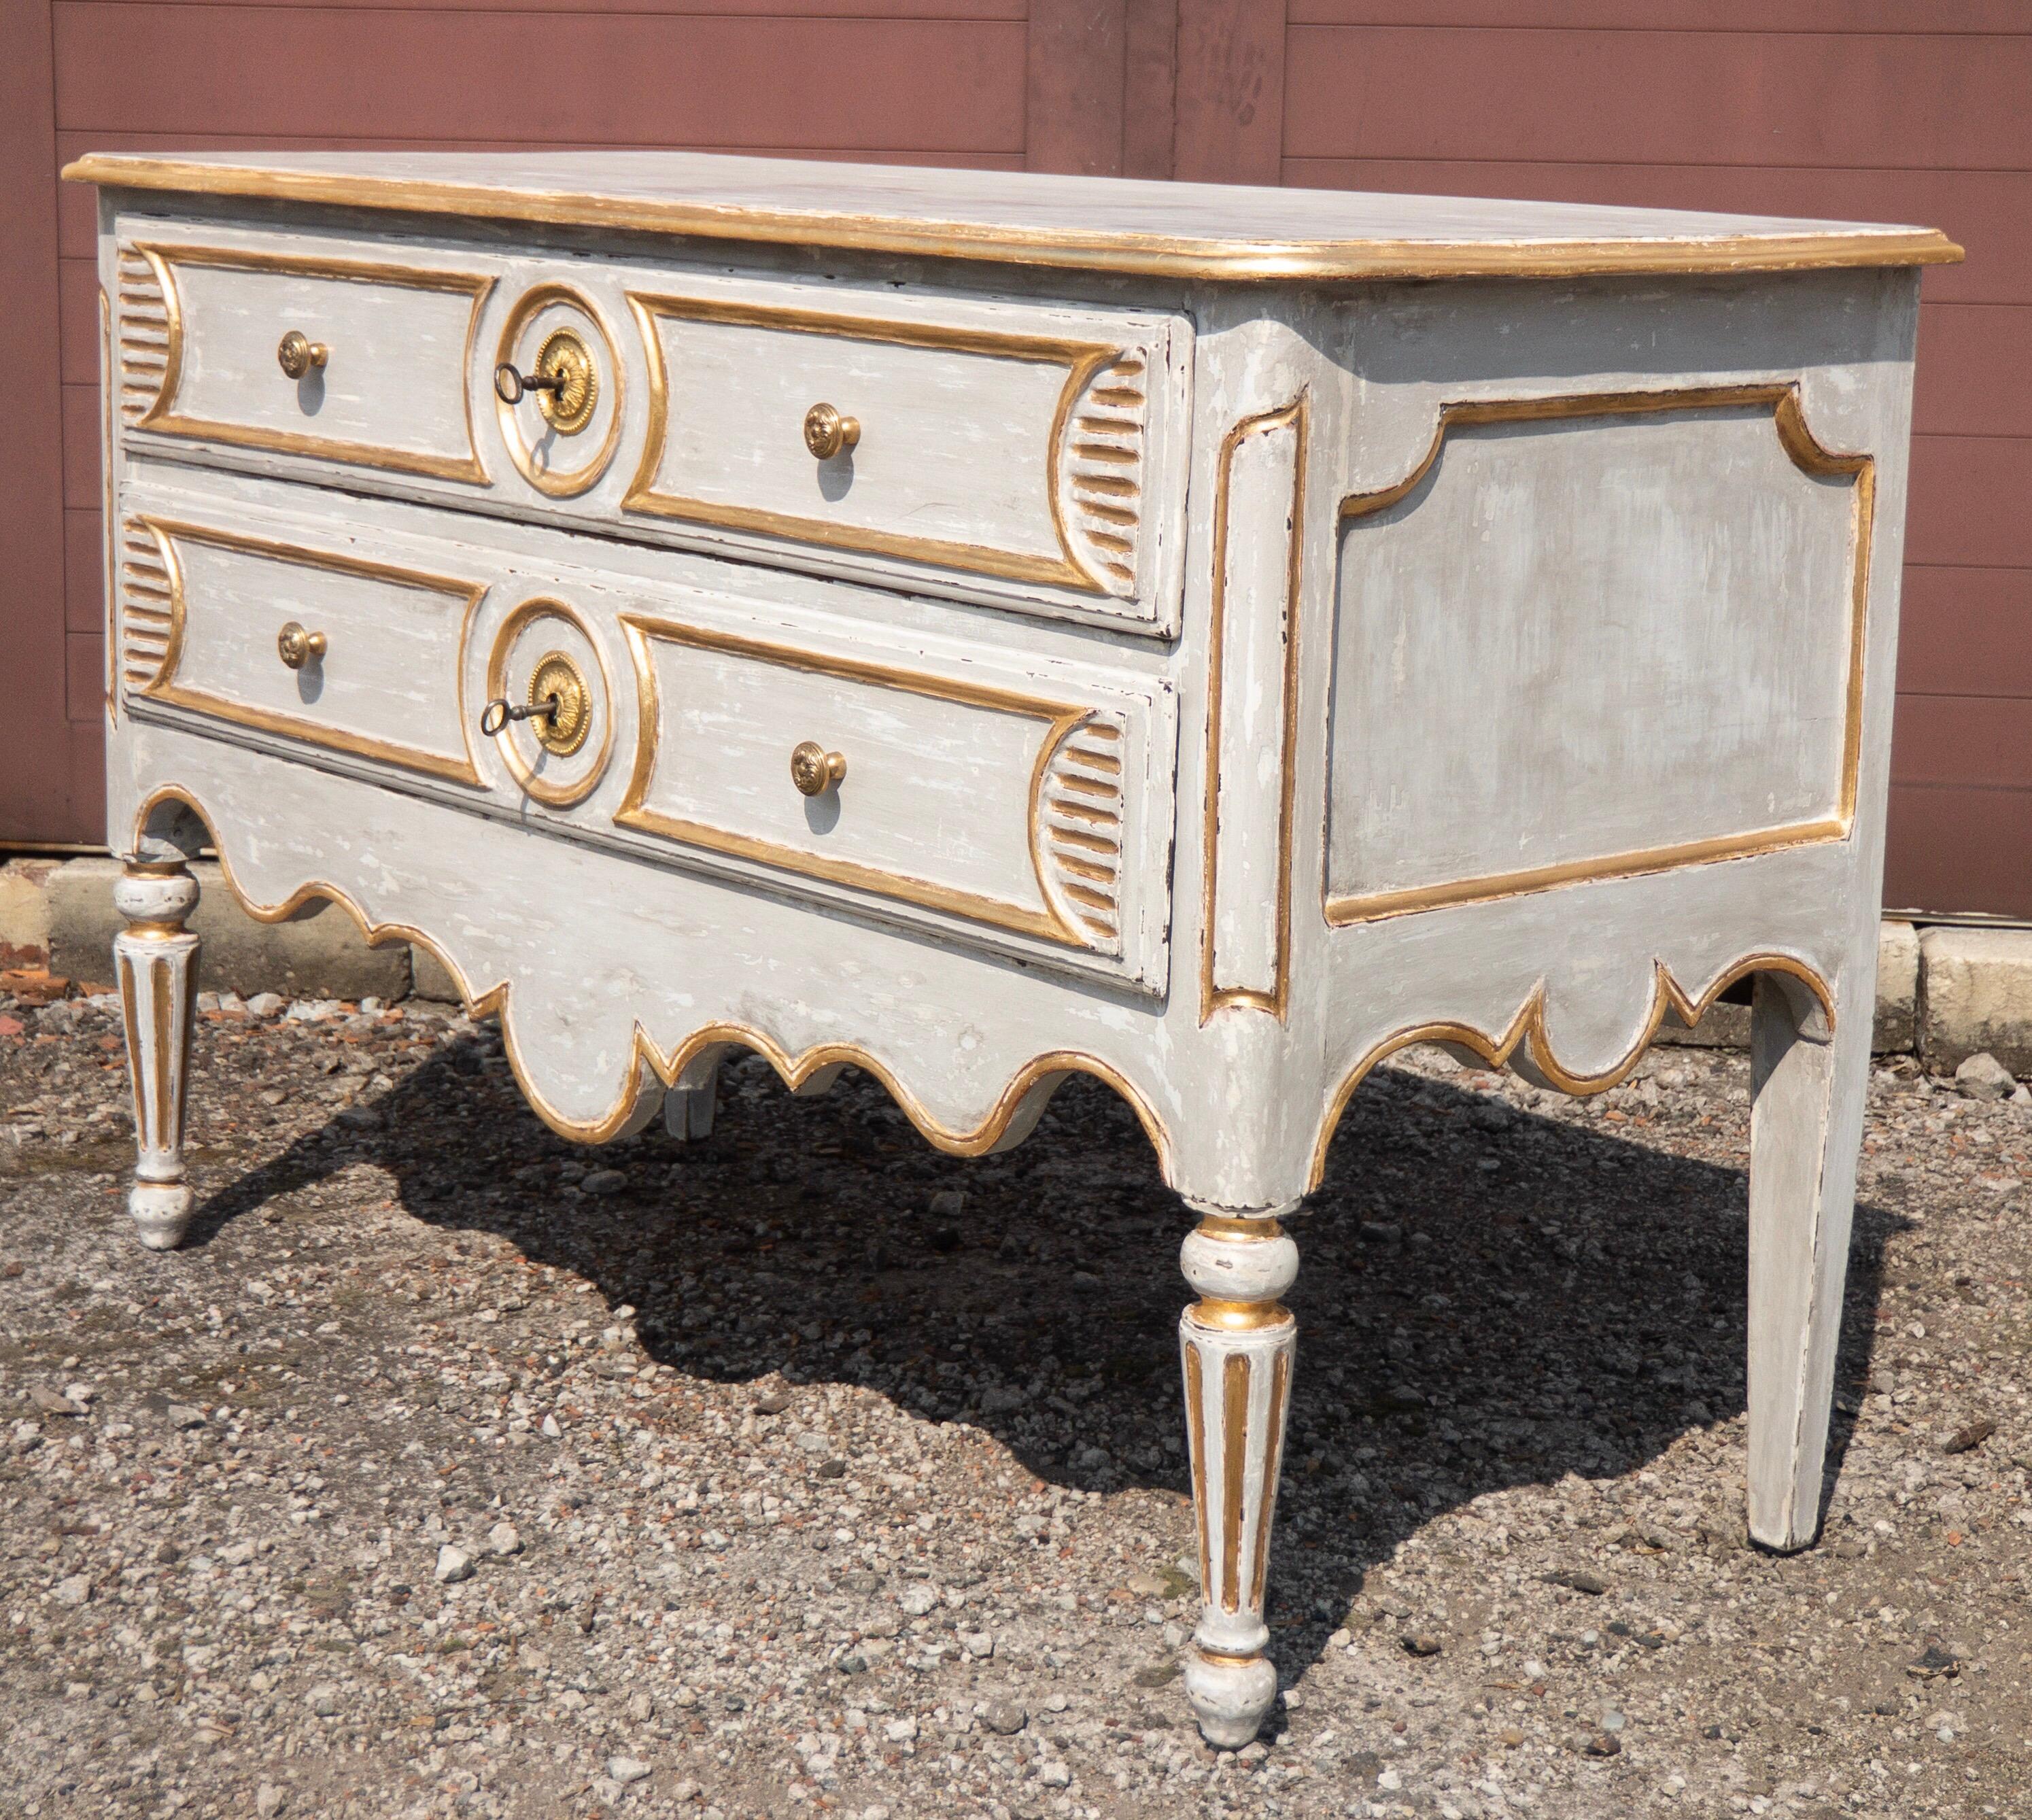 Antique rustic 18th century chest of drawers from the countryside of France with nicely carved geometrical motifs.

The chest has a new patina finish in the Gustavian/ shabby chic Style in a light cream/white/grey color. The borders of the chest